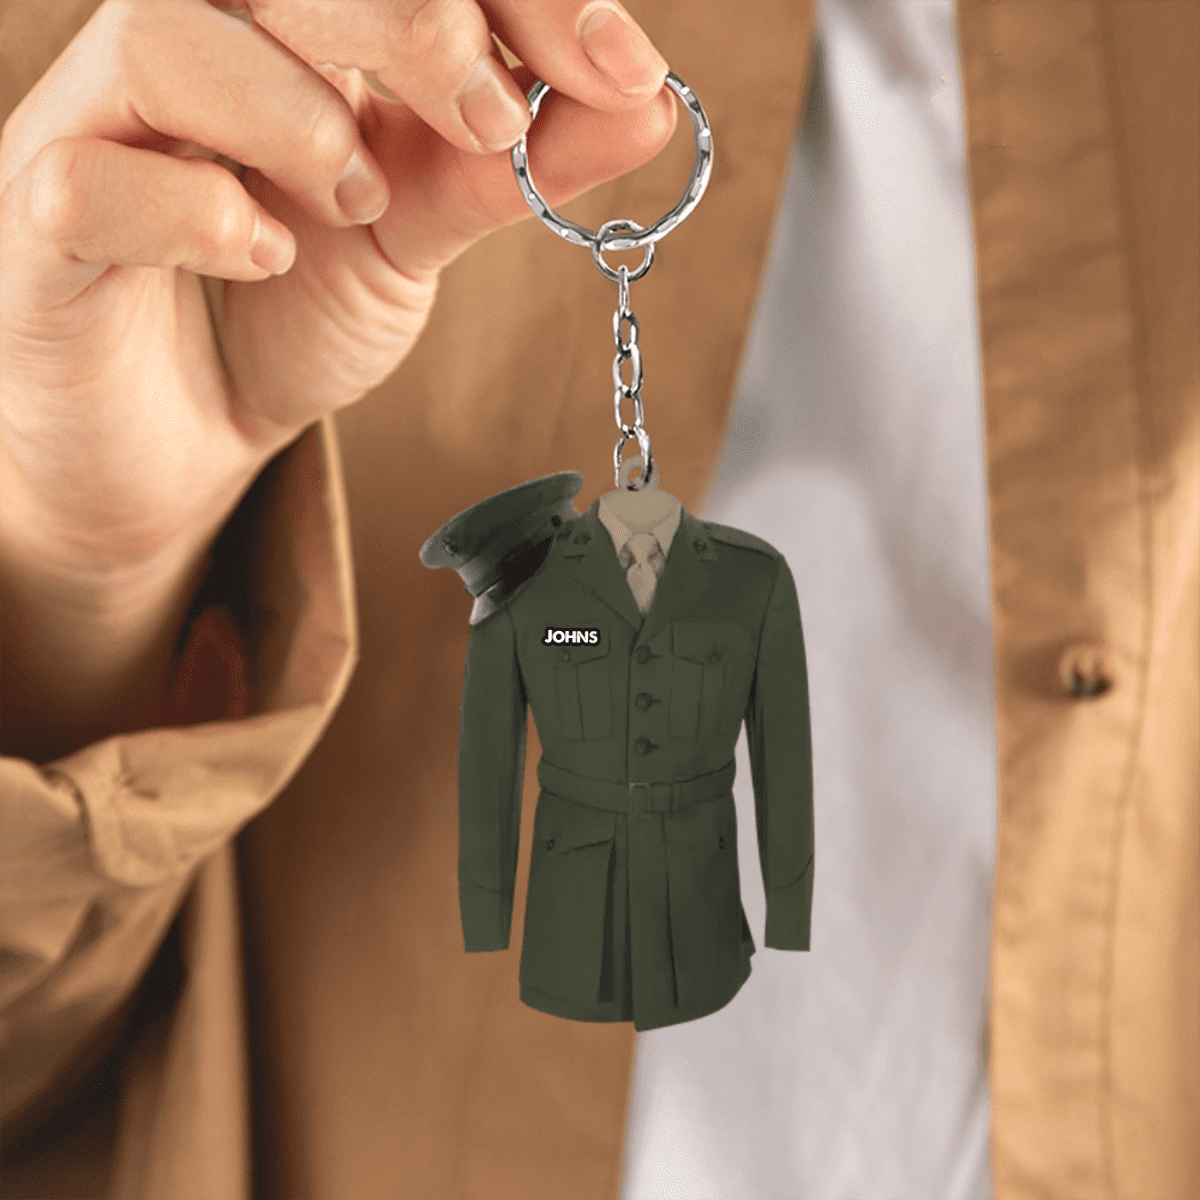 Personalized Military Uniform Keychain - Custom Name Acrylic Military Keychain for Officer/ Soldiers